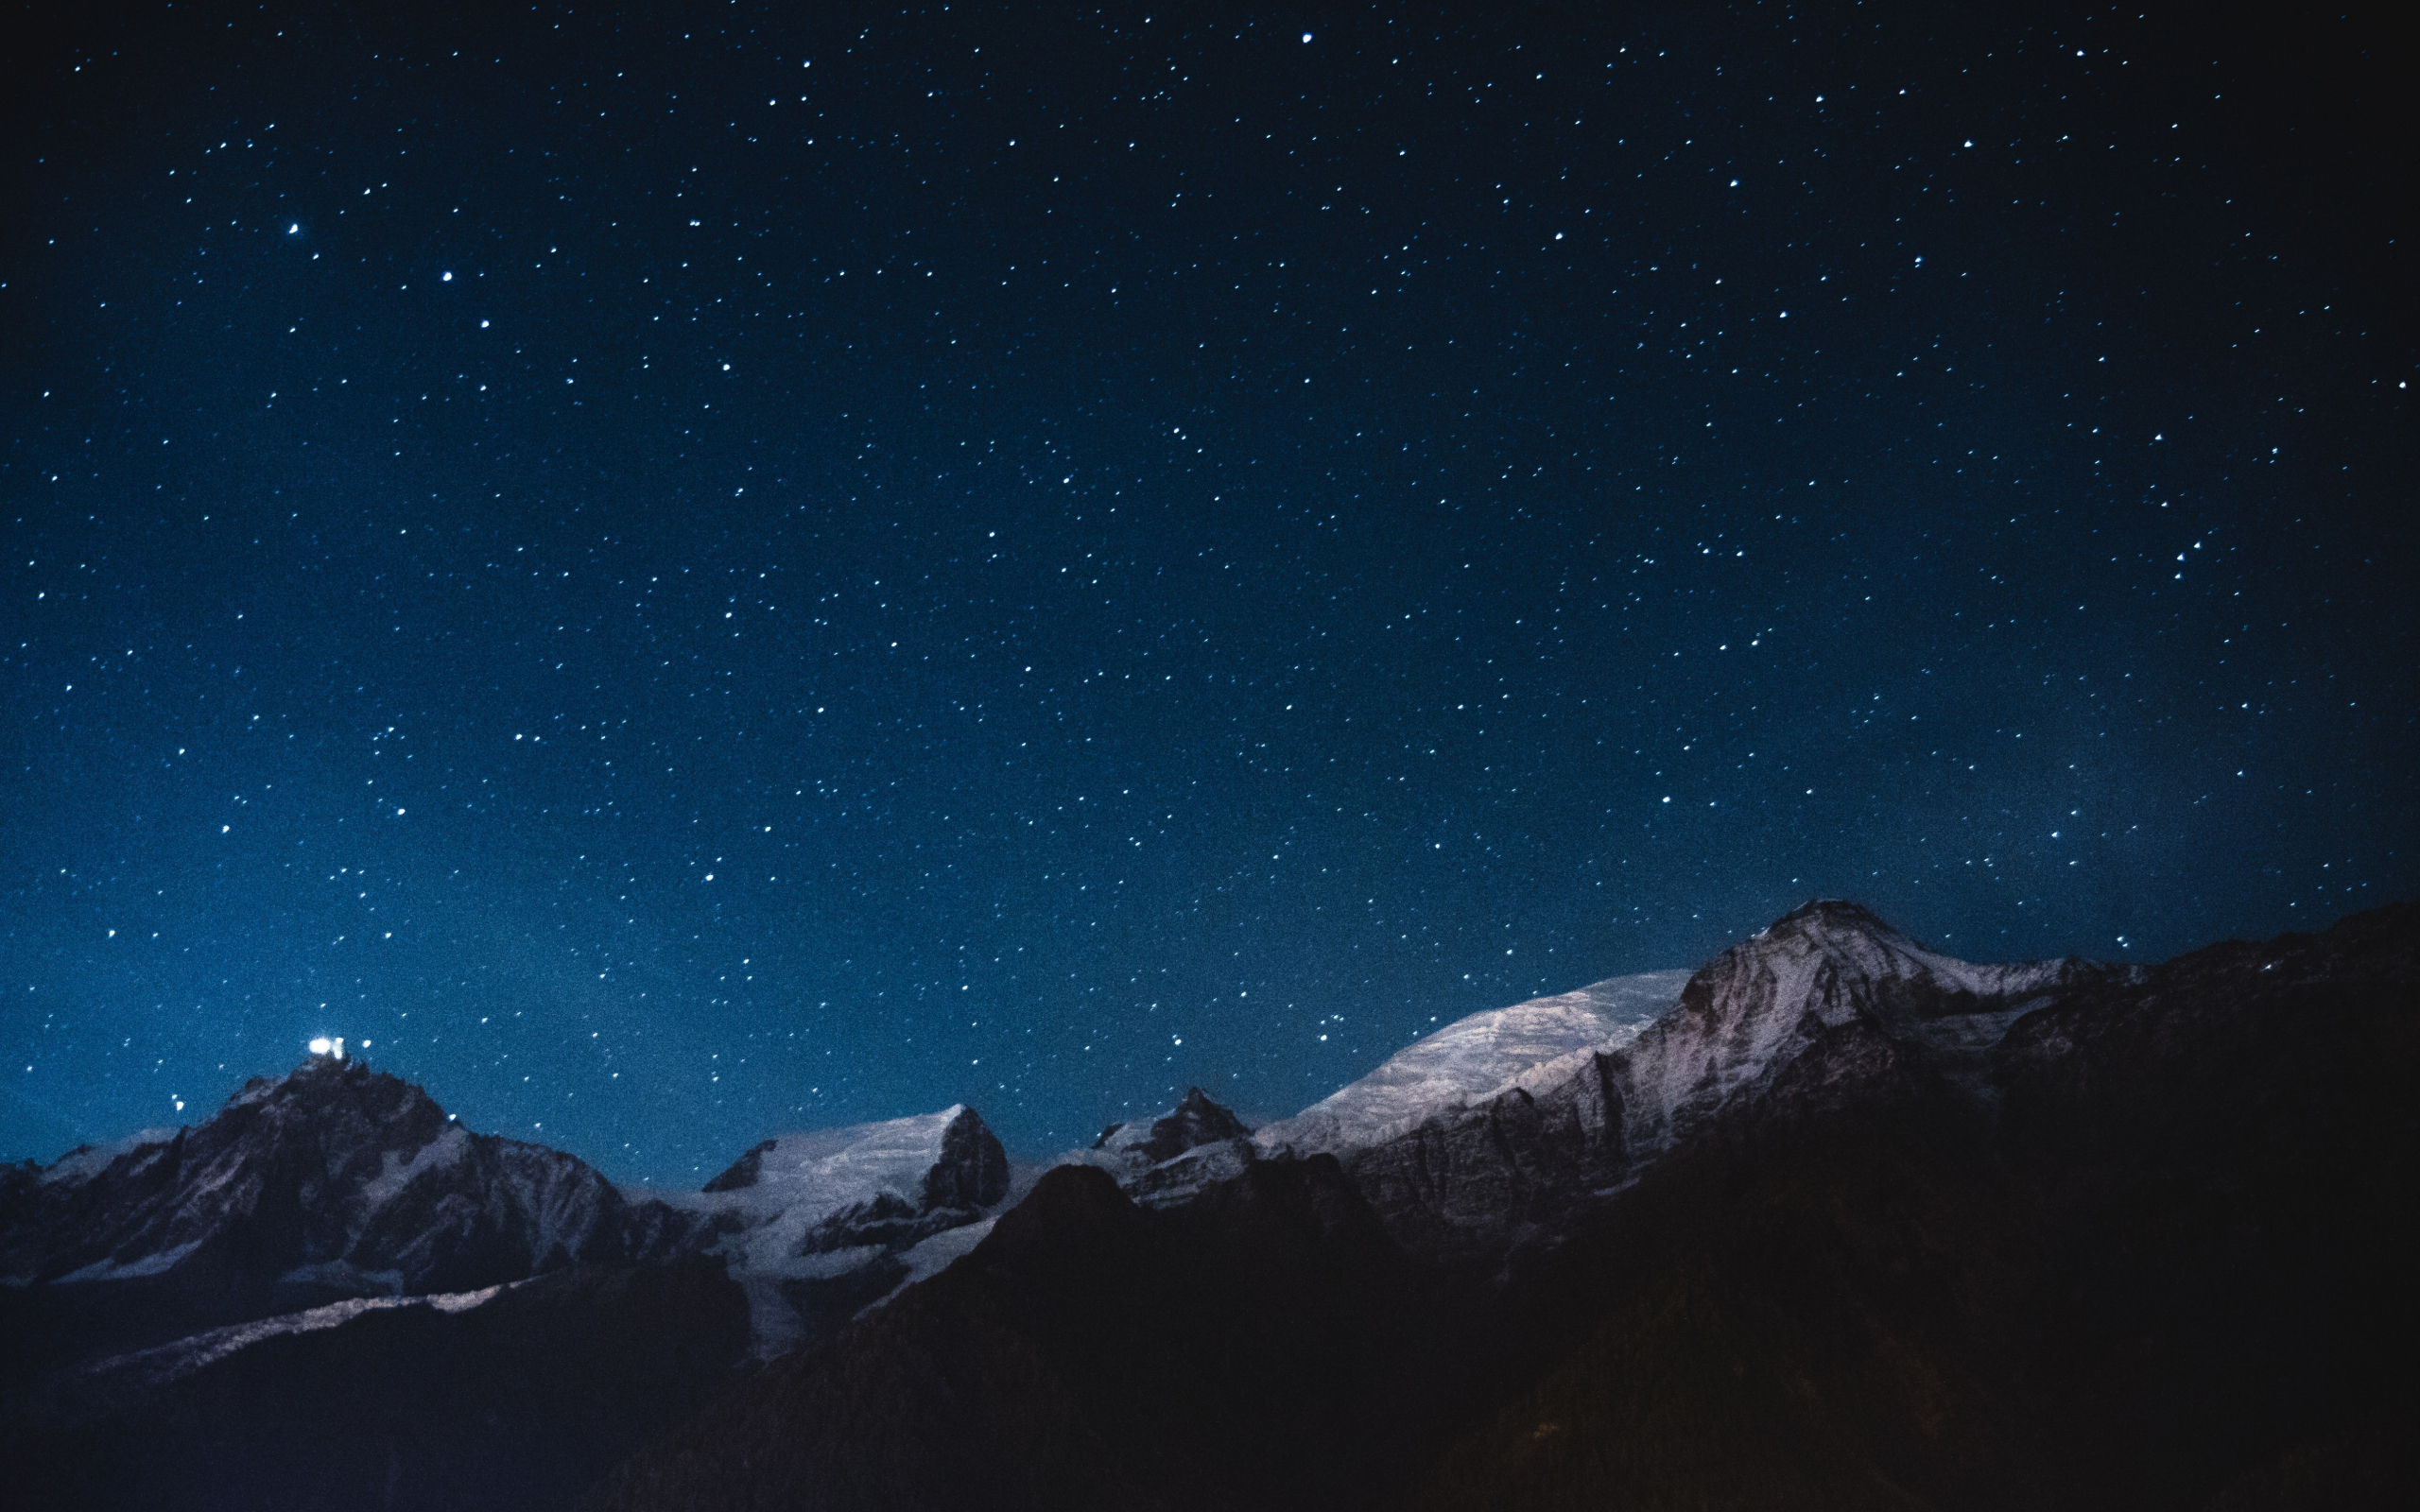 Download 2560x1600 wallpaper night, mountains, stars, nature, sky, dual wide, widescreen 16: widescreen, 2560x1600 HD image, background, 3556